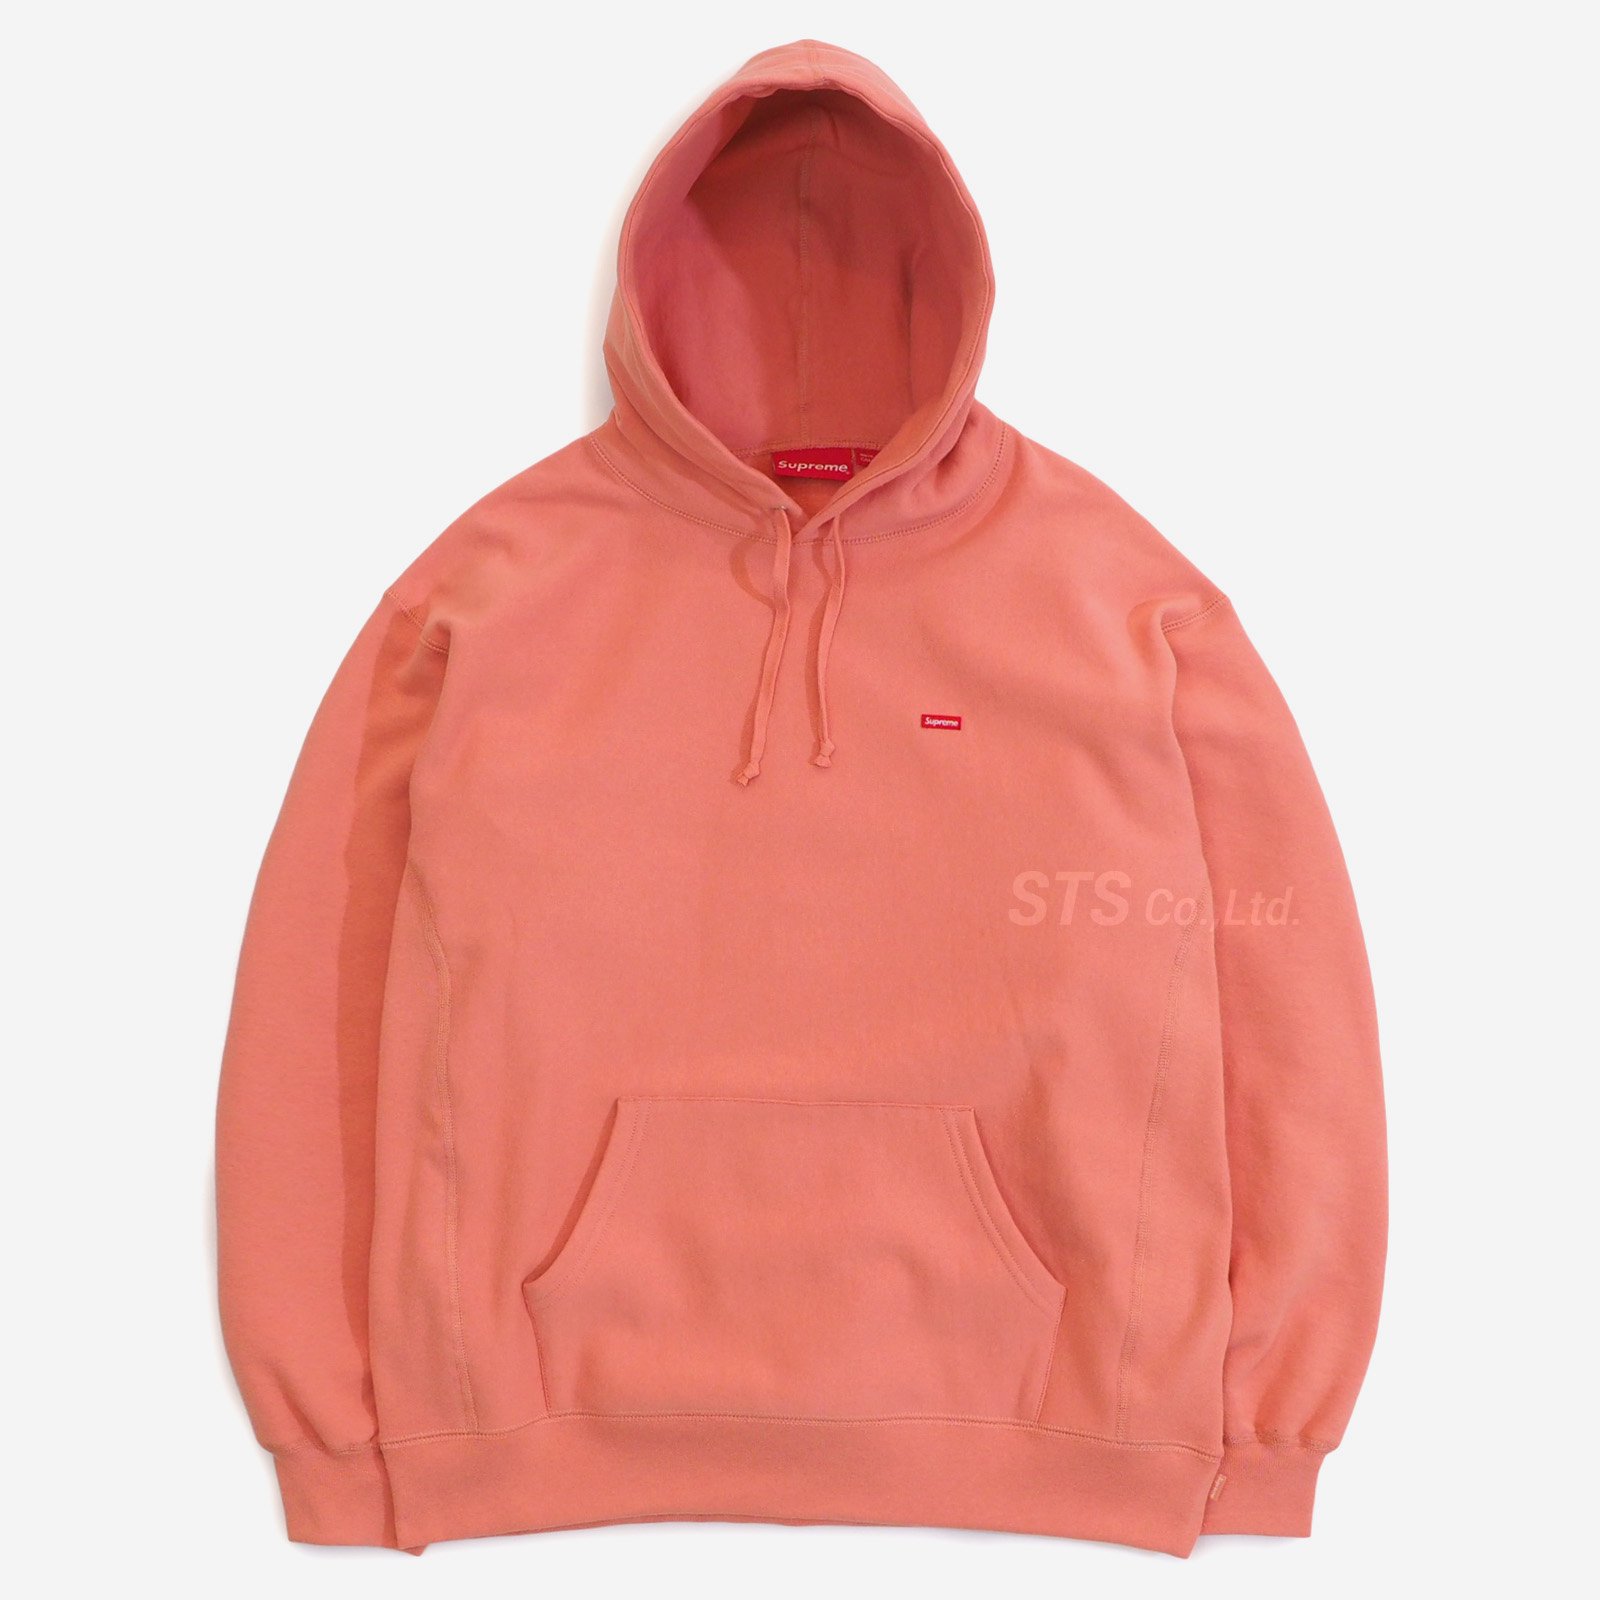 Patagoniasupreme small box hooded Dusty Coral